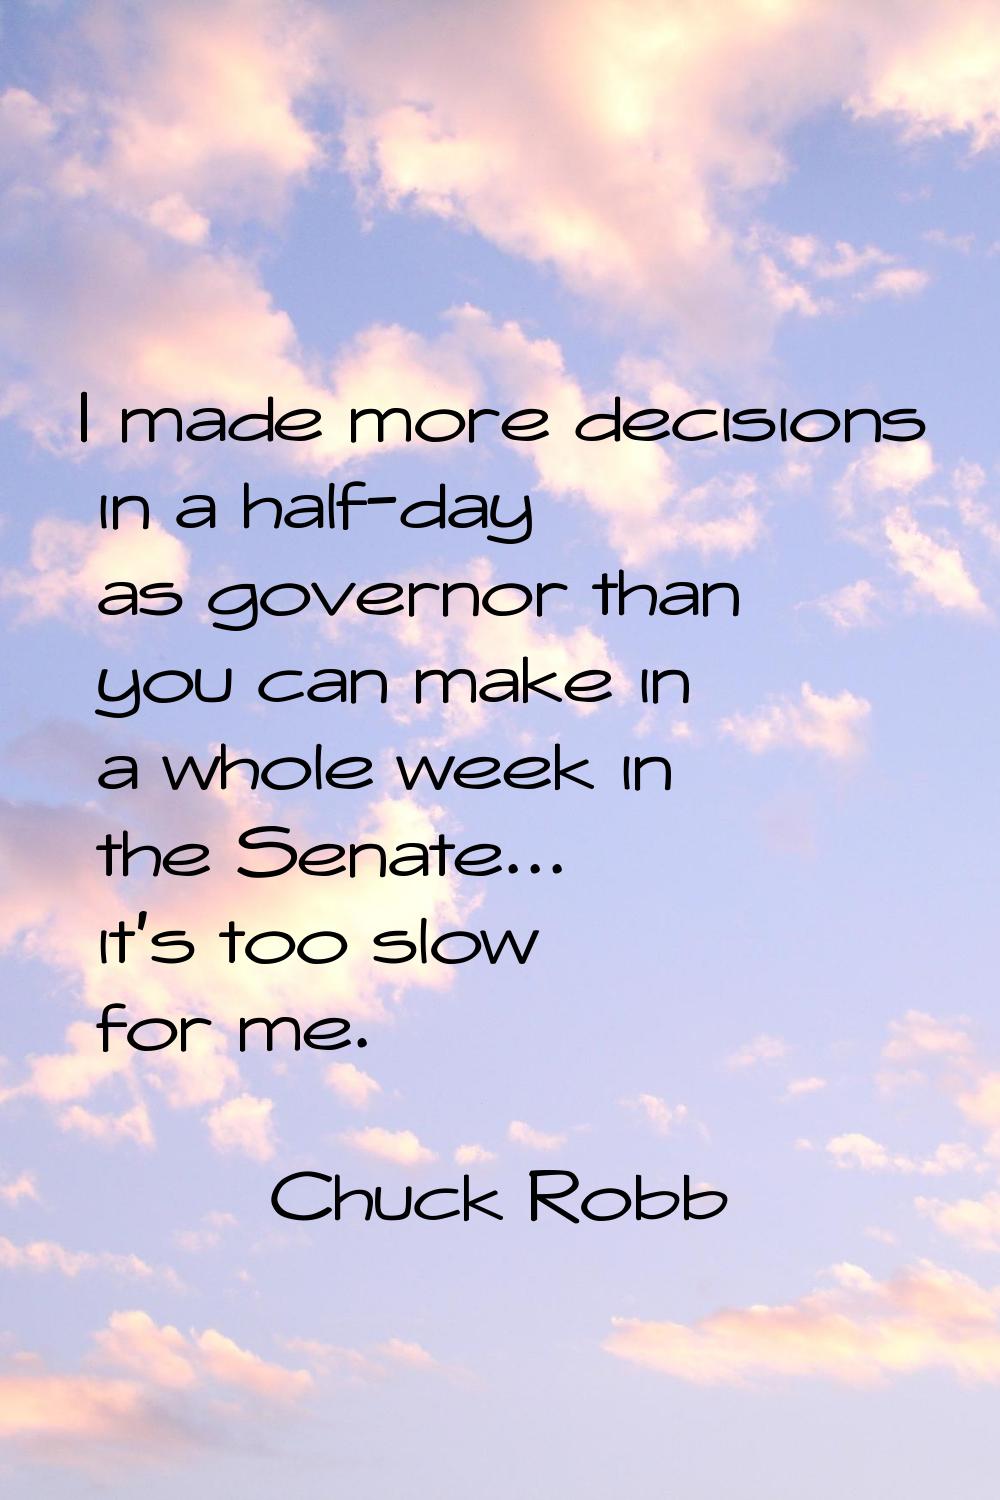 I made more decisions in a half-day as governor than you can make in a whole week in the Senate... 